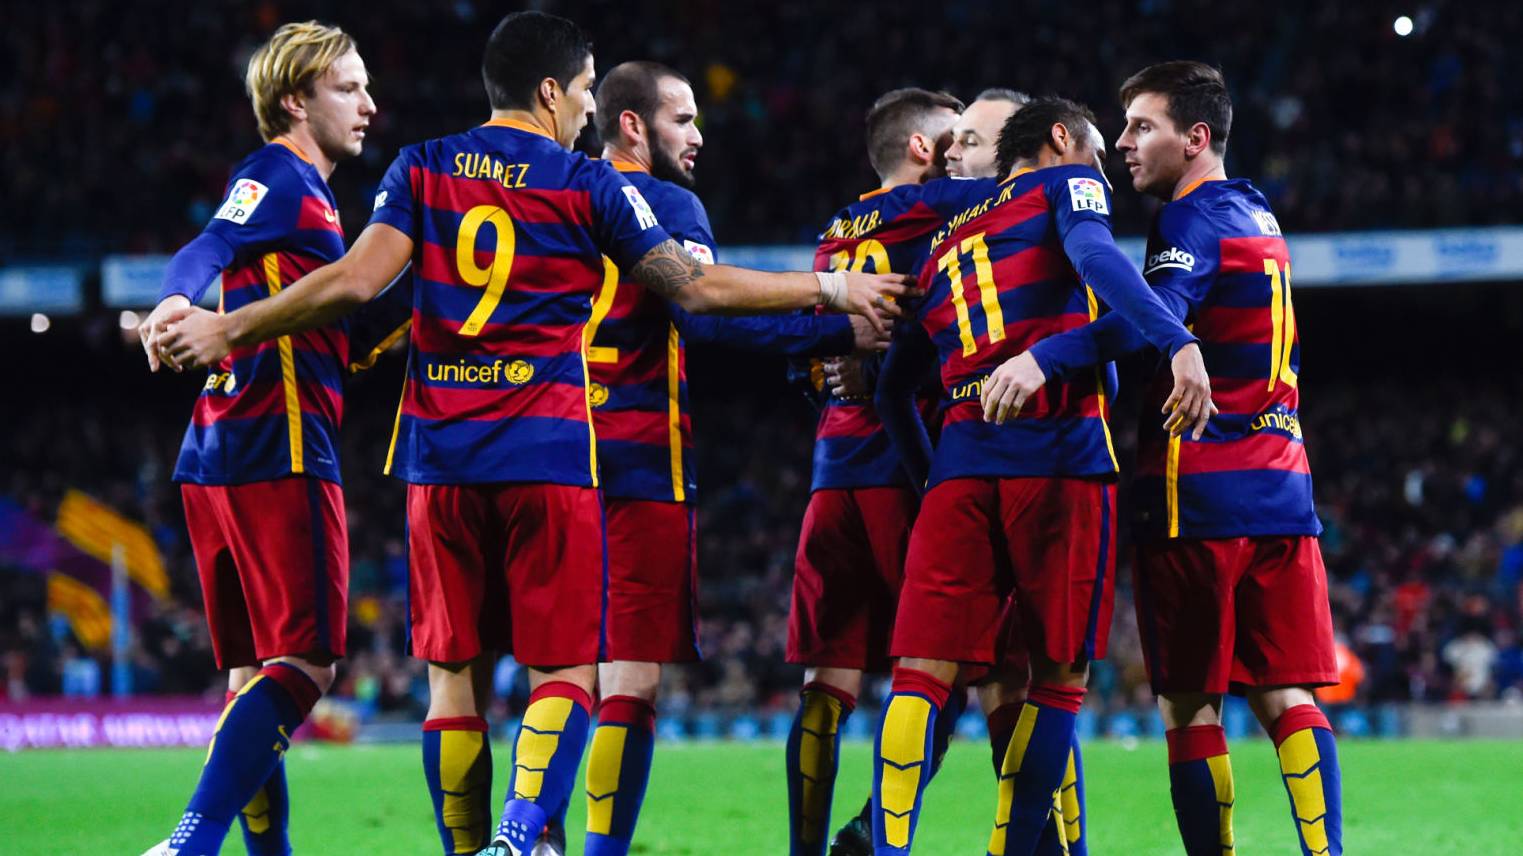 The FC Barcelona could celebrate soon the mathematical title